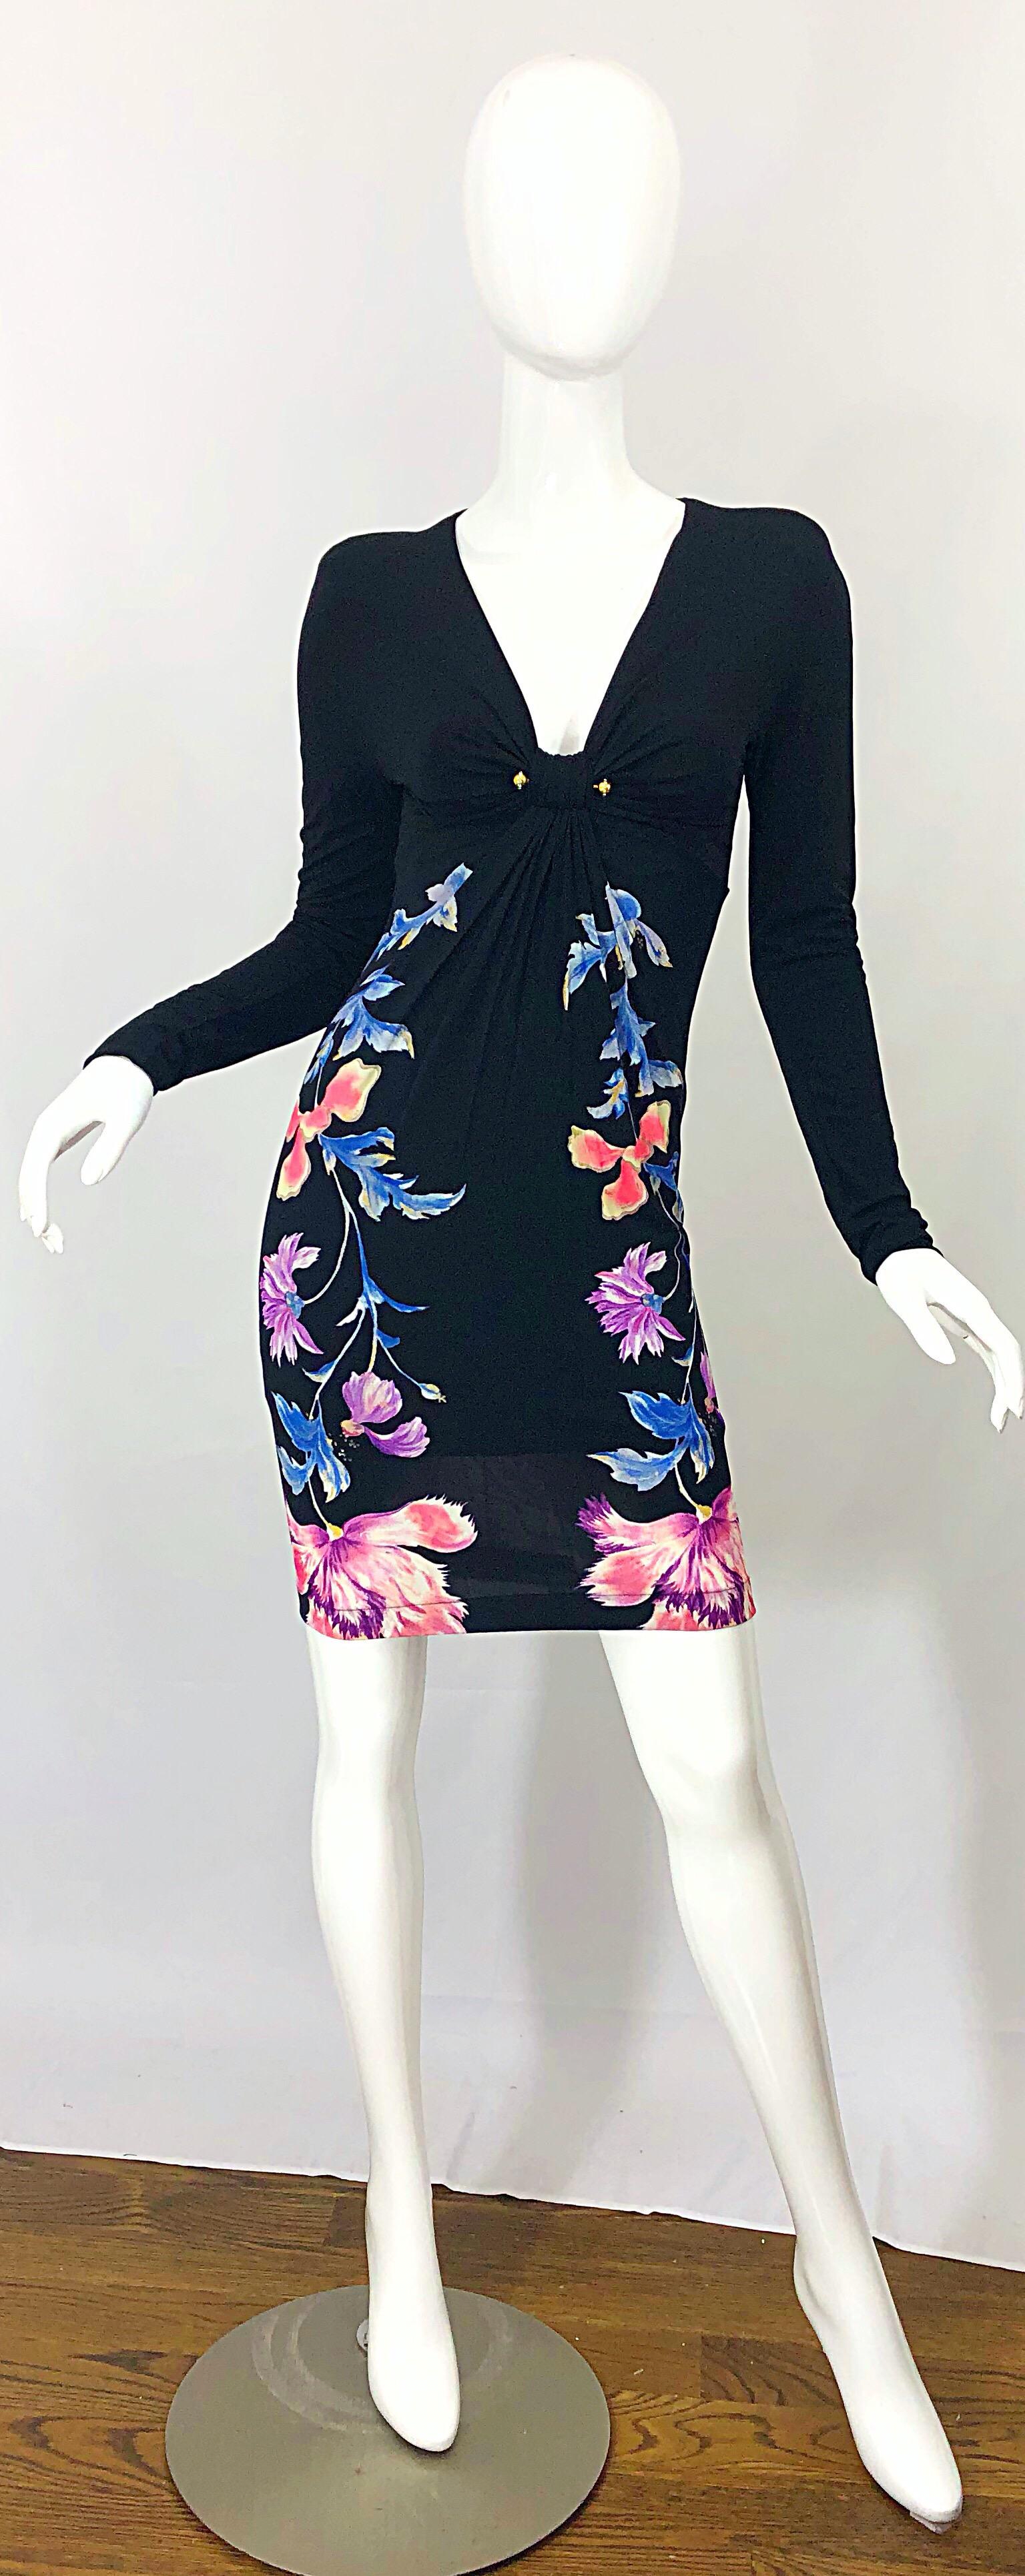 Sexy, yet sophisticated new early 2000s ROBERTO CAVAlLI strong shoulders long sleeve black dress! Features flowers in vibrant colors of pink, blue and purple up each side of the front and back. Rhinestone encrusted detail at the neck. Built in